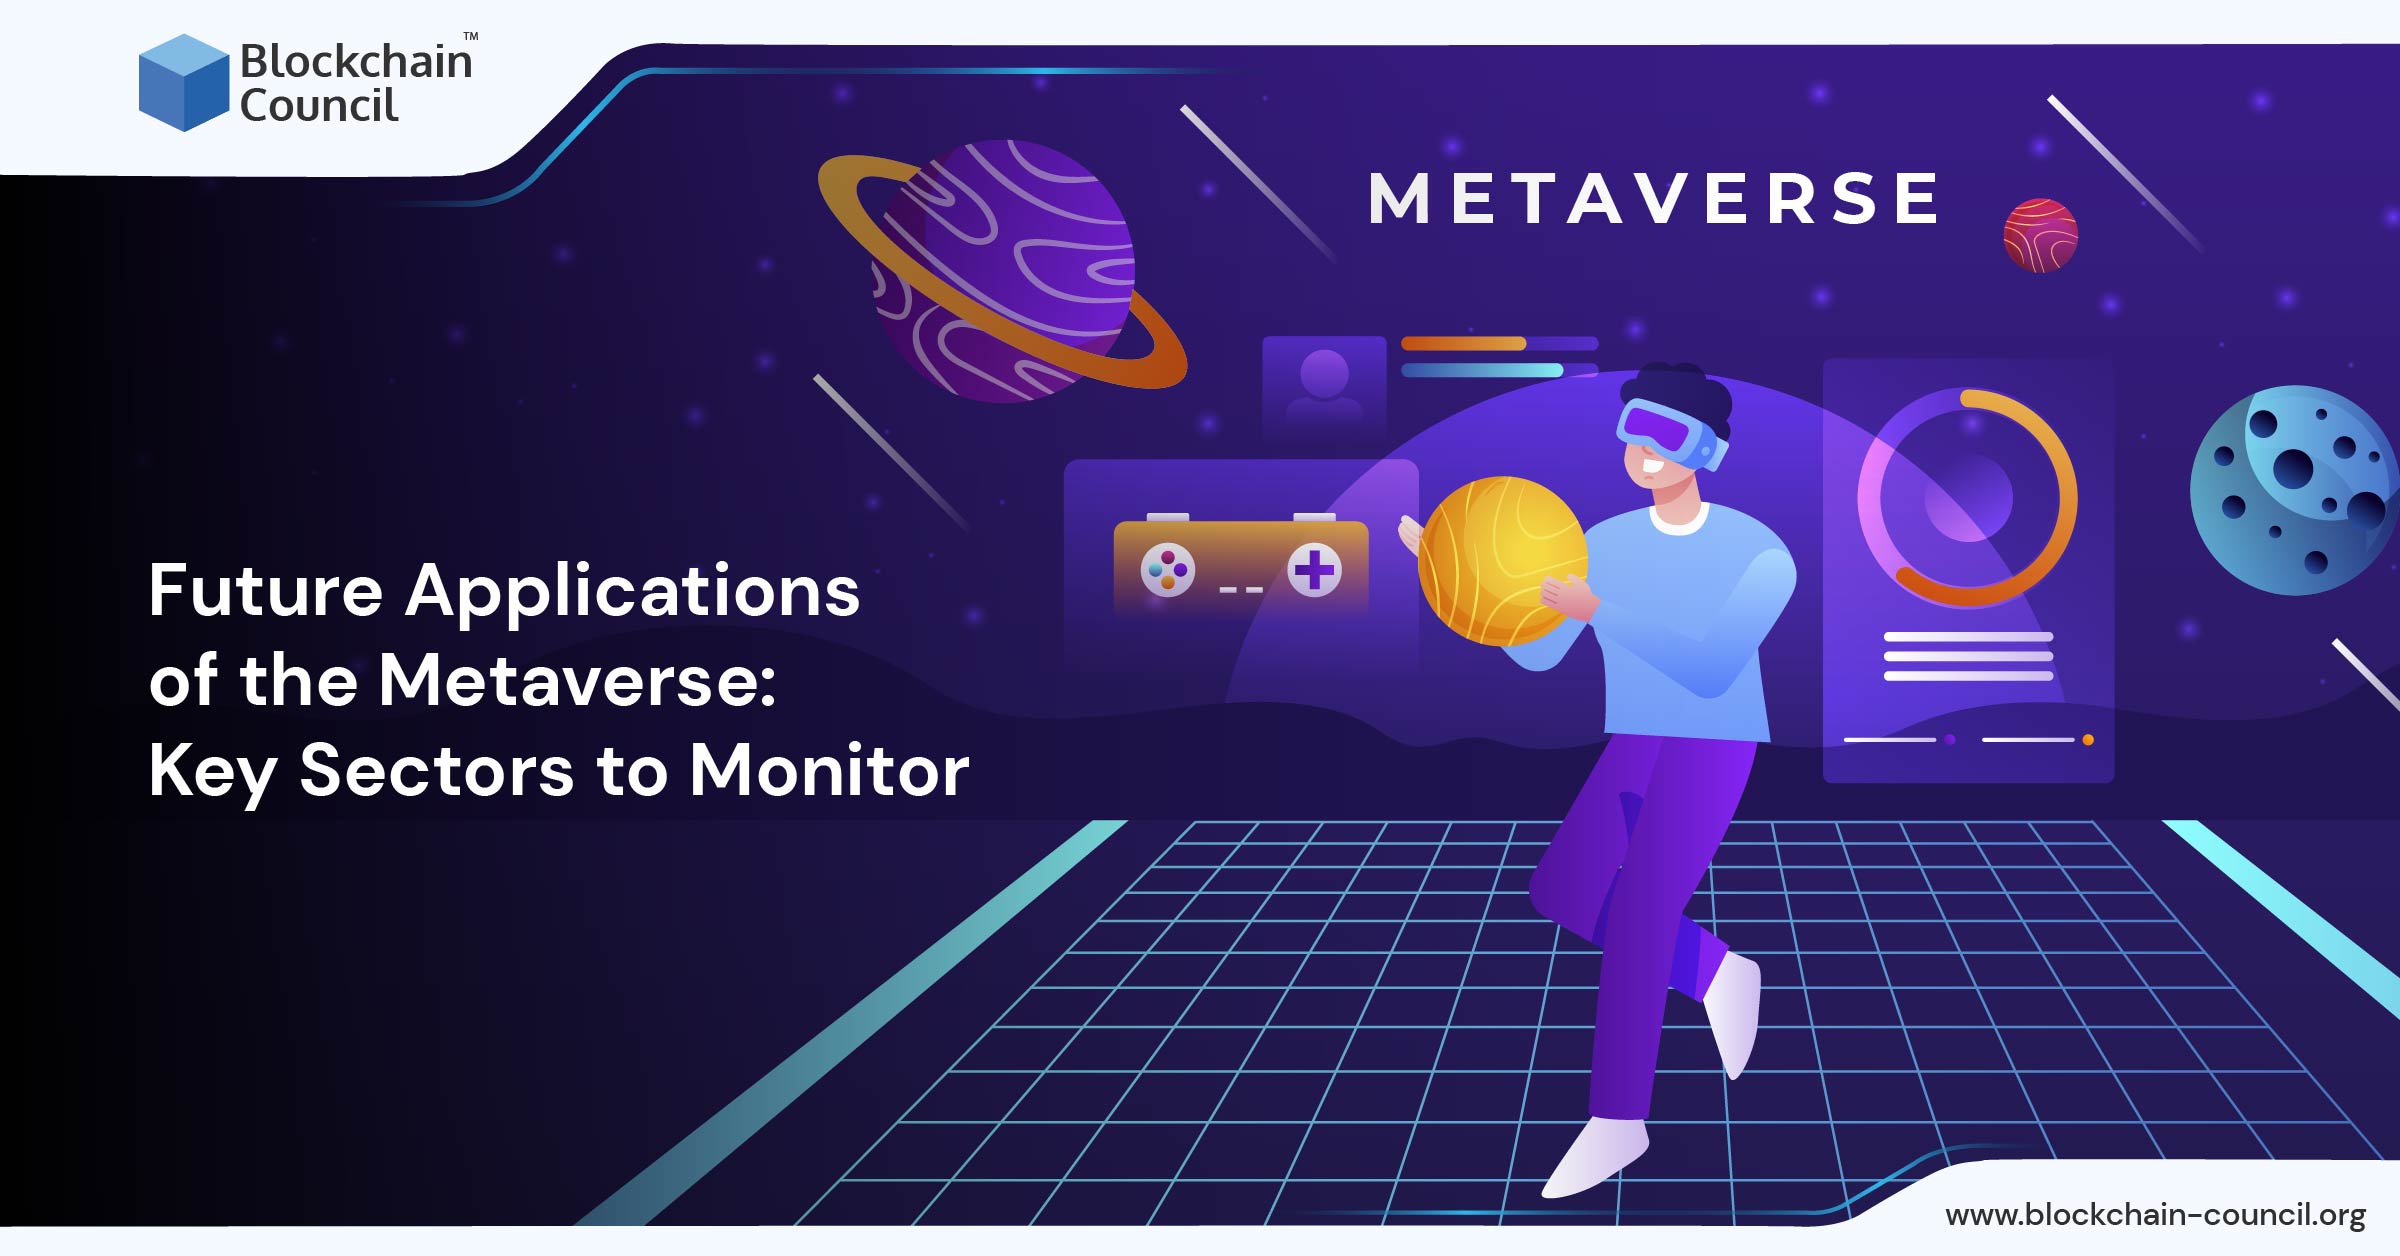 Explainer: 7 metaverse terms to help you understand the future of the  internet, from Web3 to play-to-earn games - YP